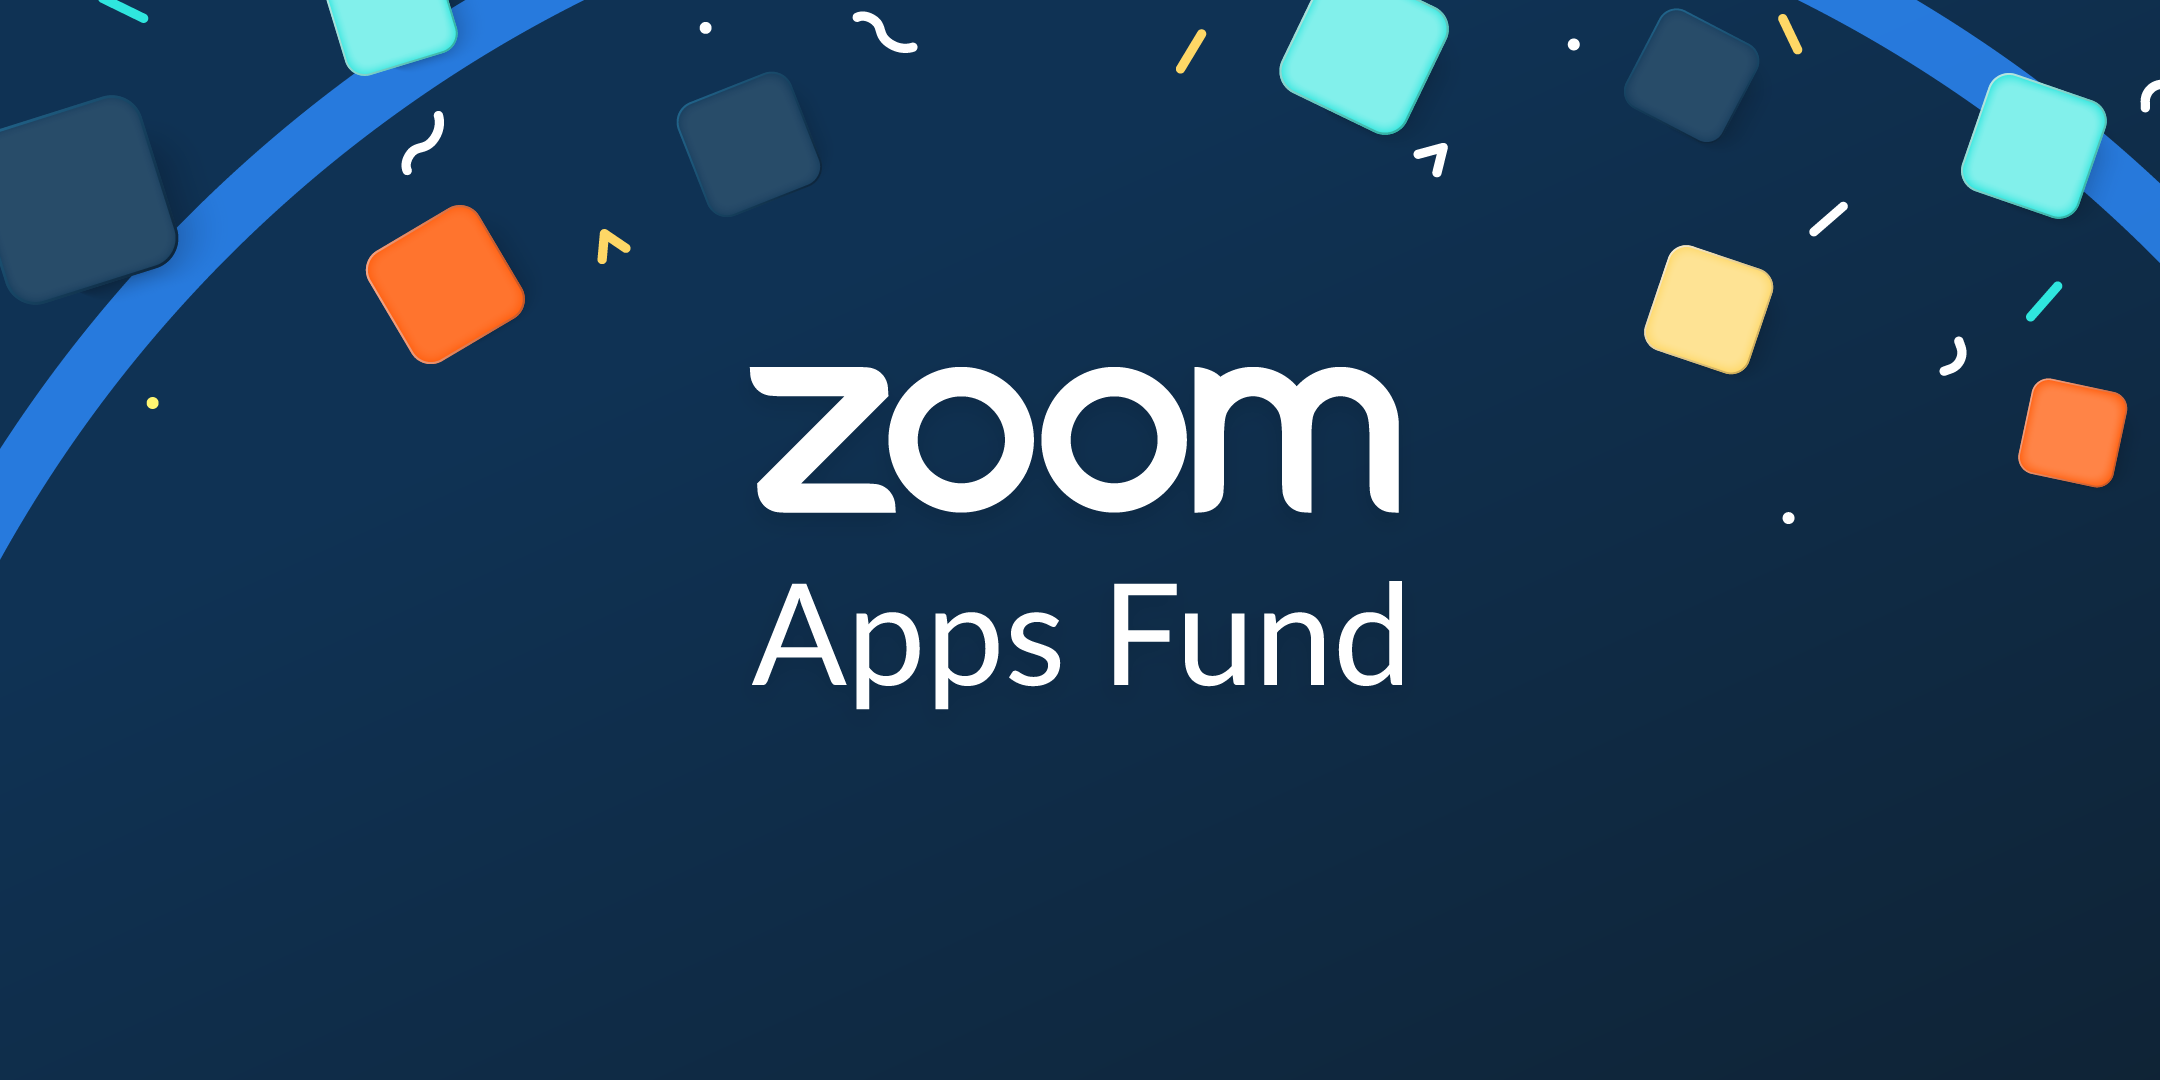 Want To Build The Next Big Thing On The Zoom Platform? We Want To Invest In You!